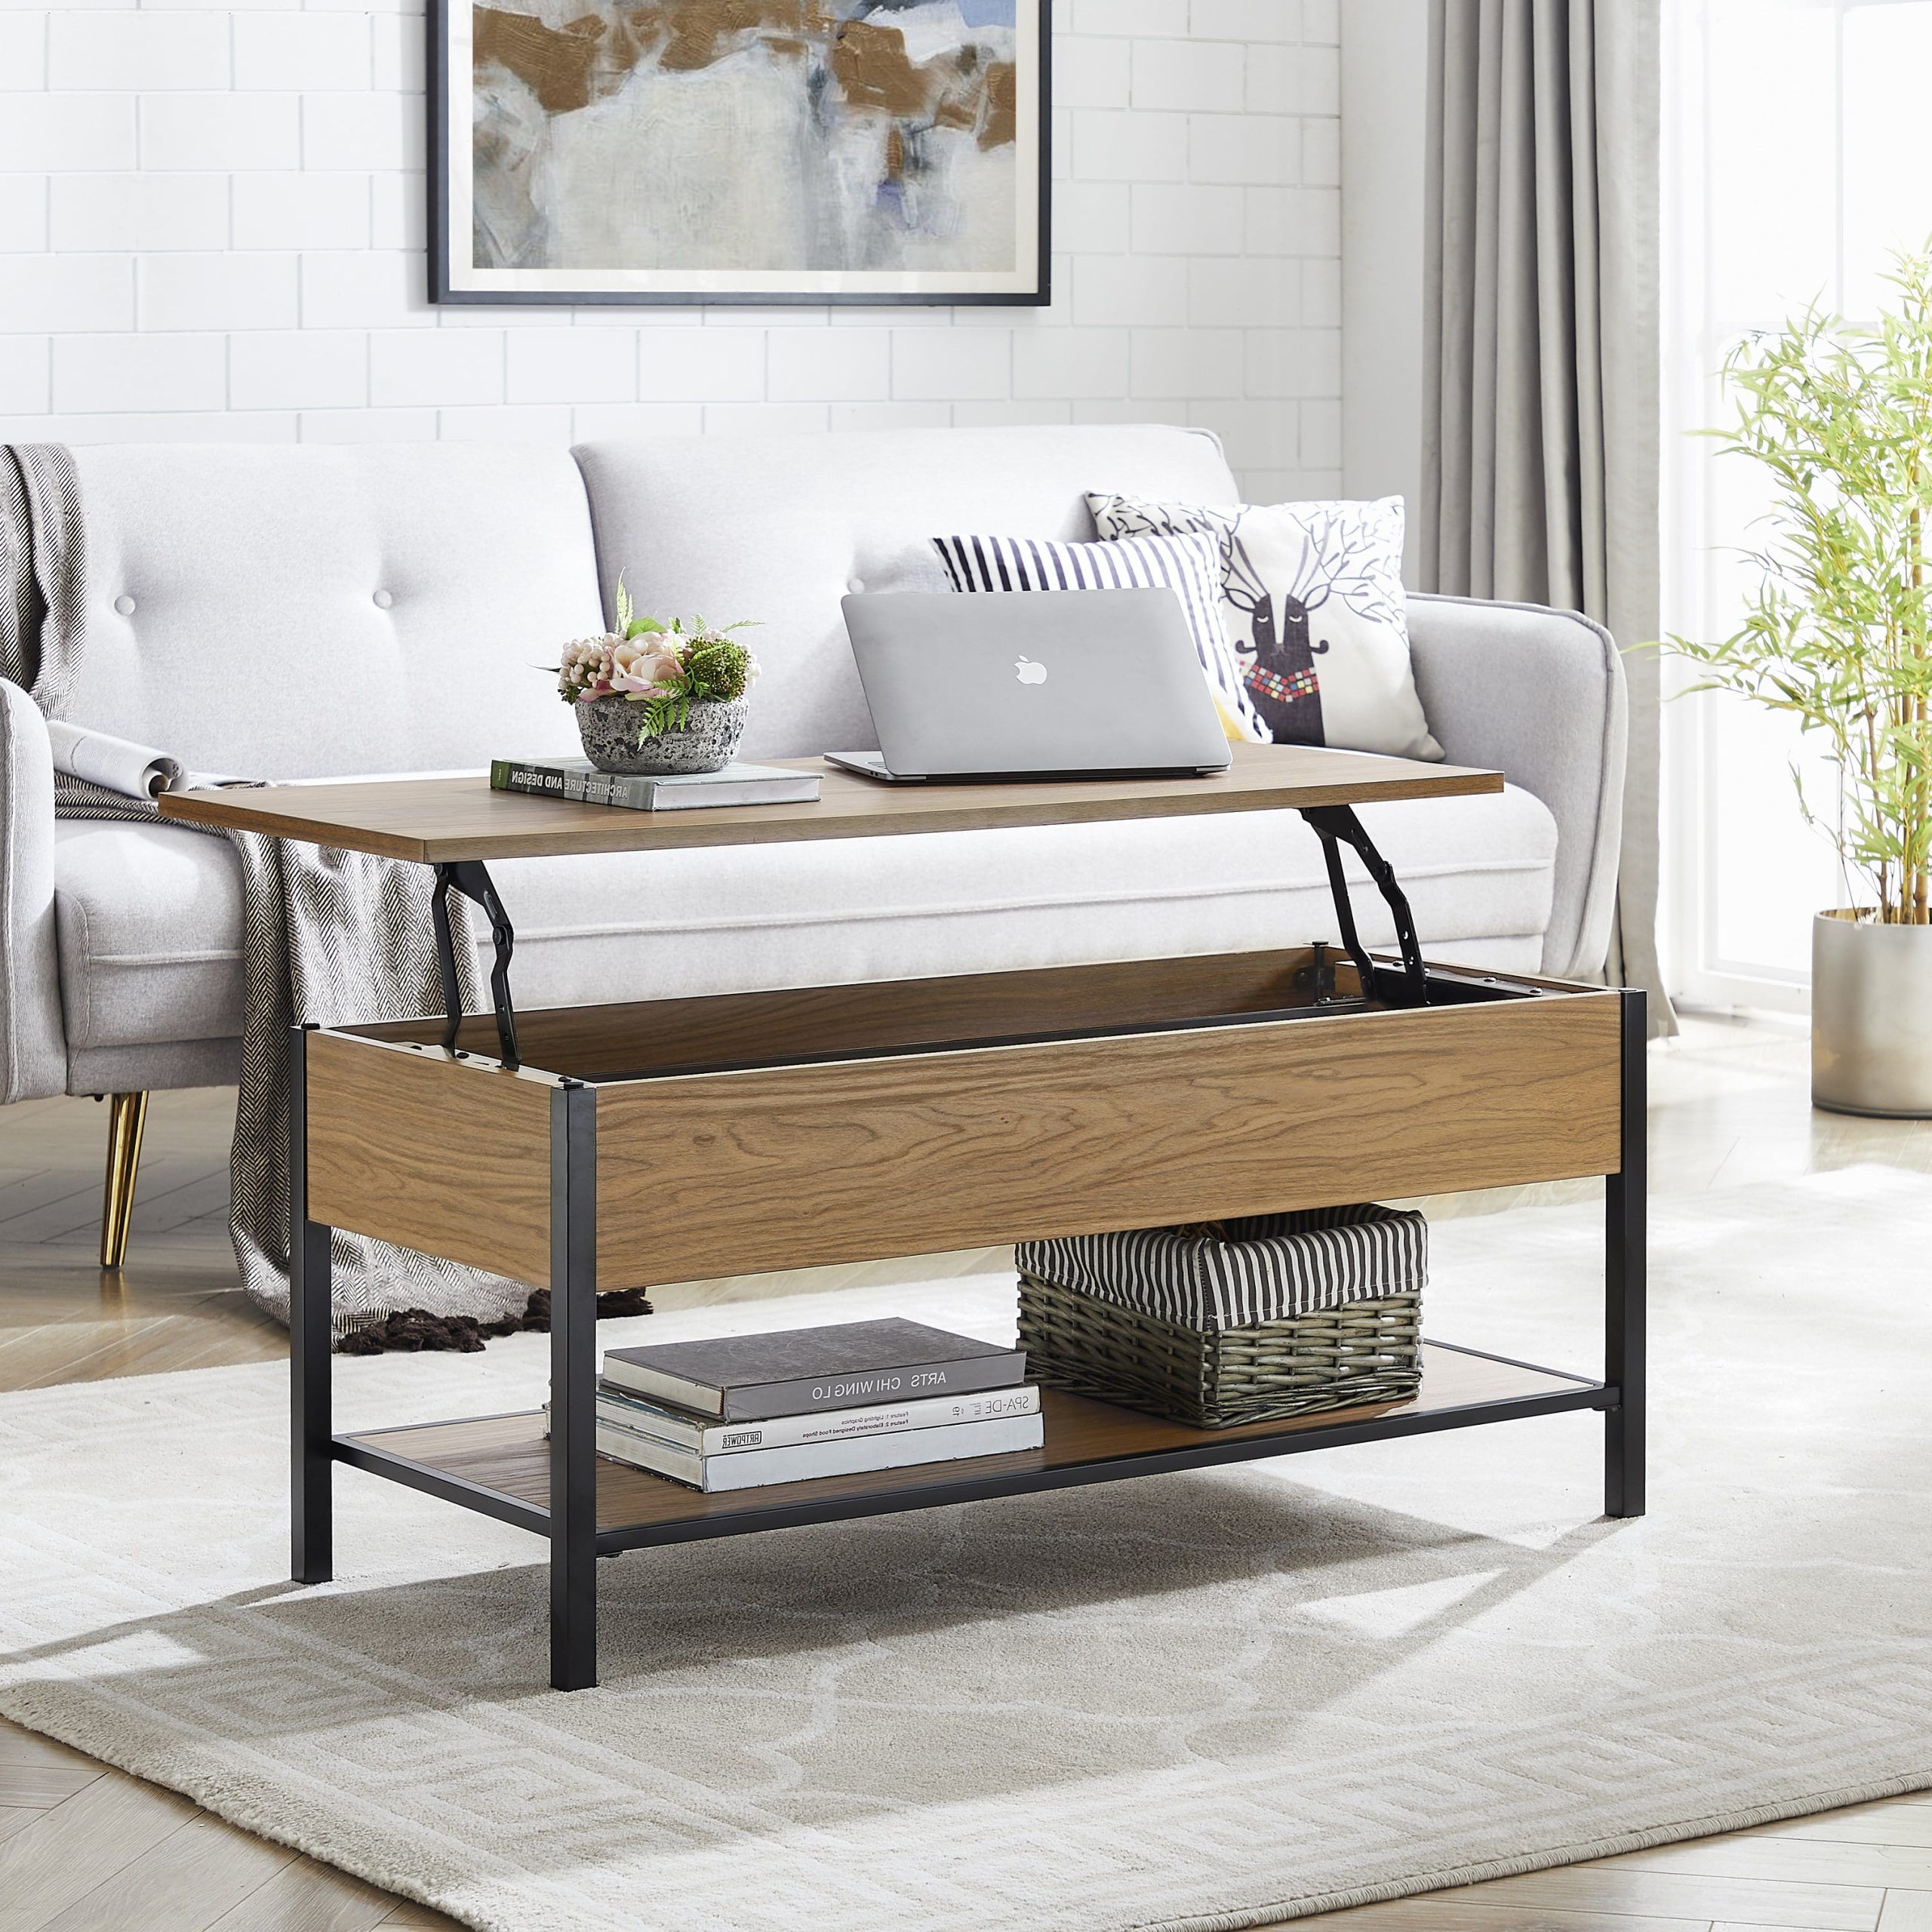 Lift Top Coffee Tables Intended For Most Popular Mainstays Lift Top Coffee Table With Storage, Canyon Walnut – Walmart (View 22 of 26)